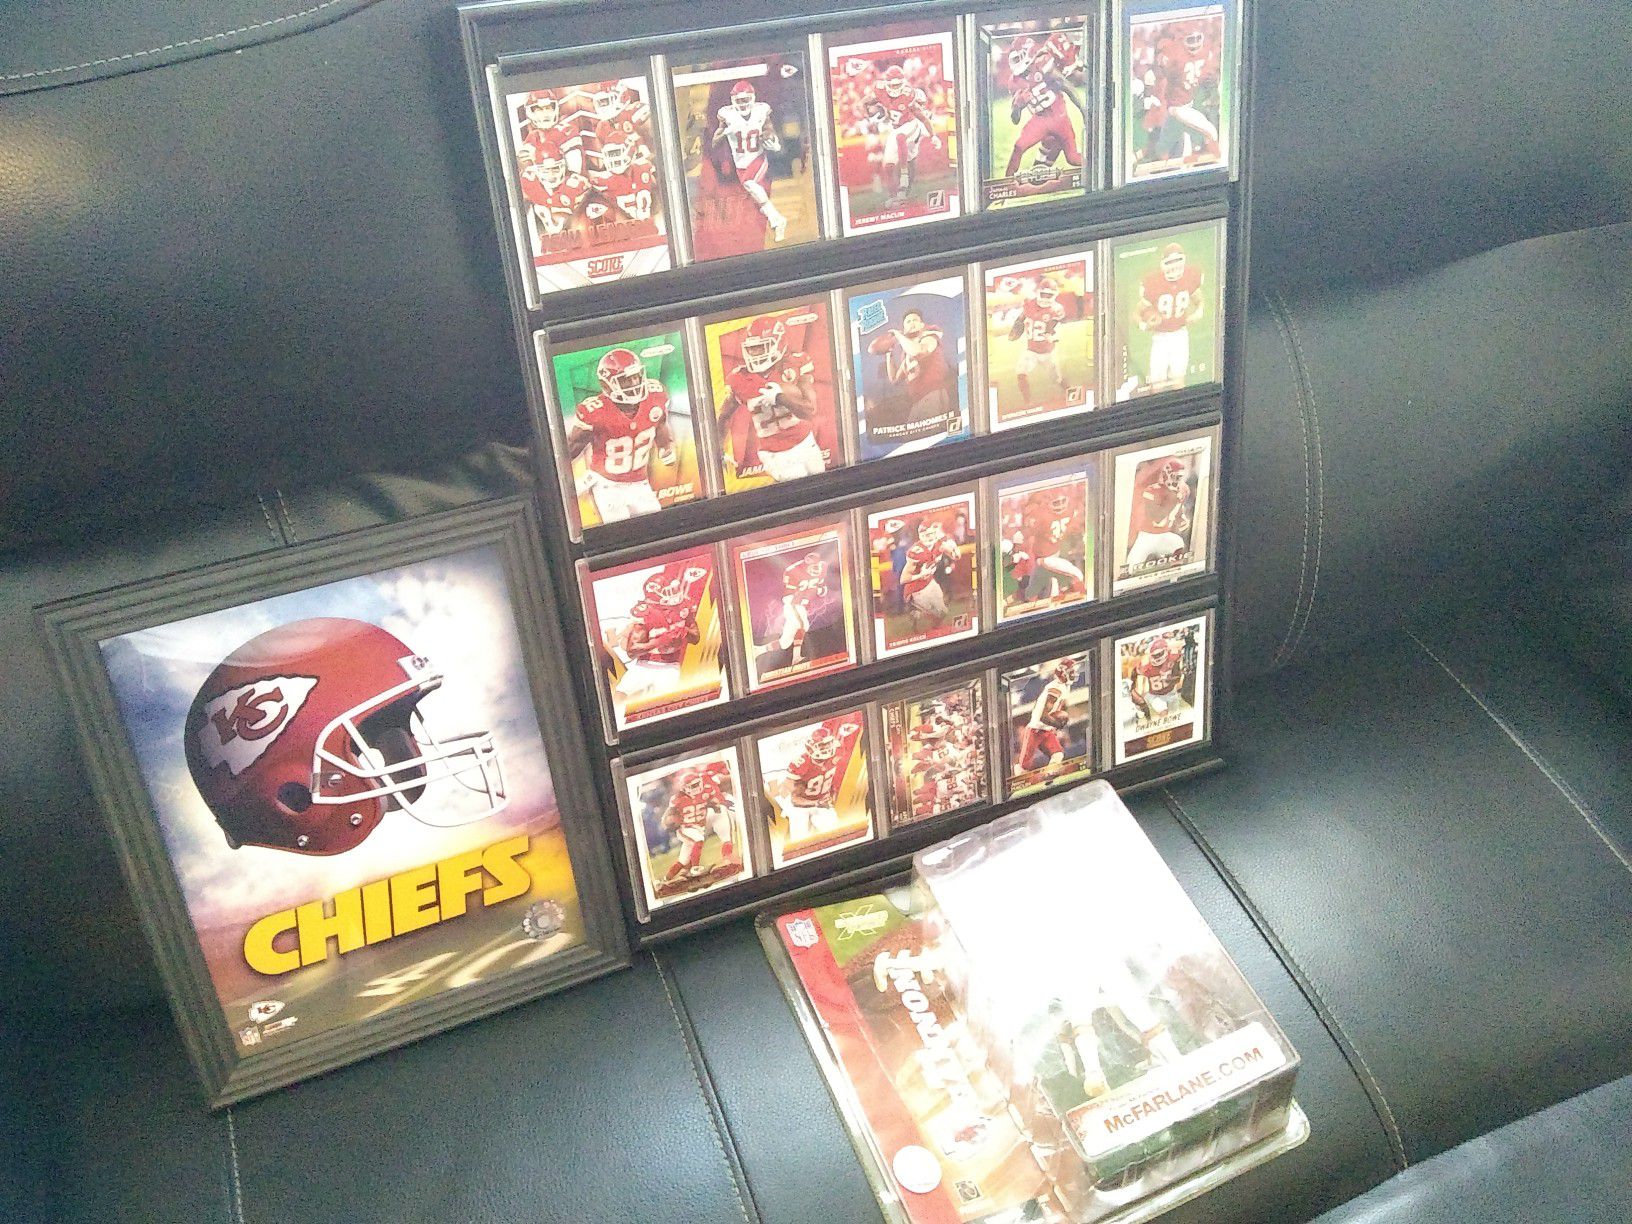 KC bundle, with Mahomes rookie card